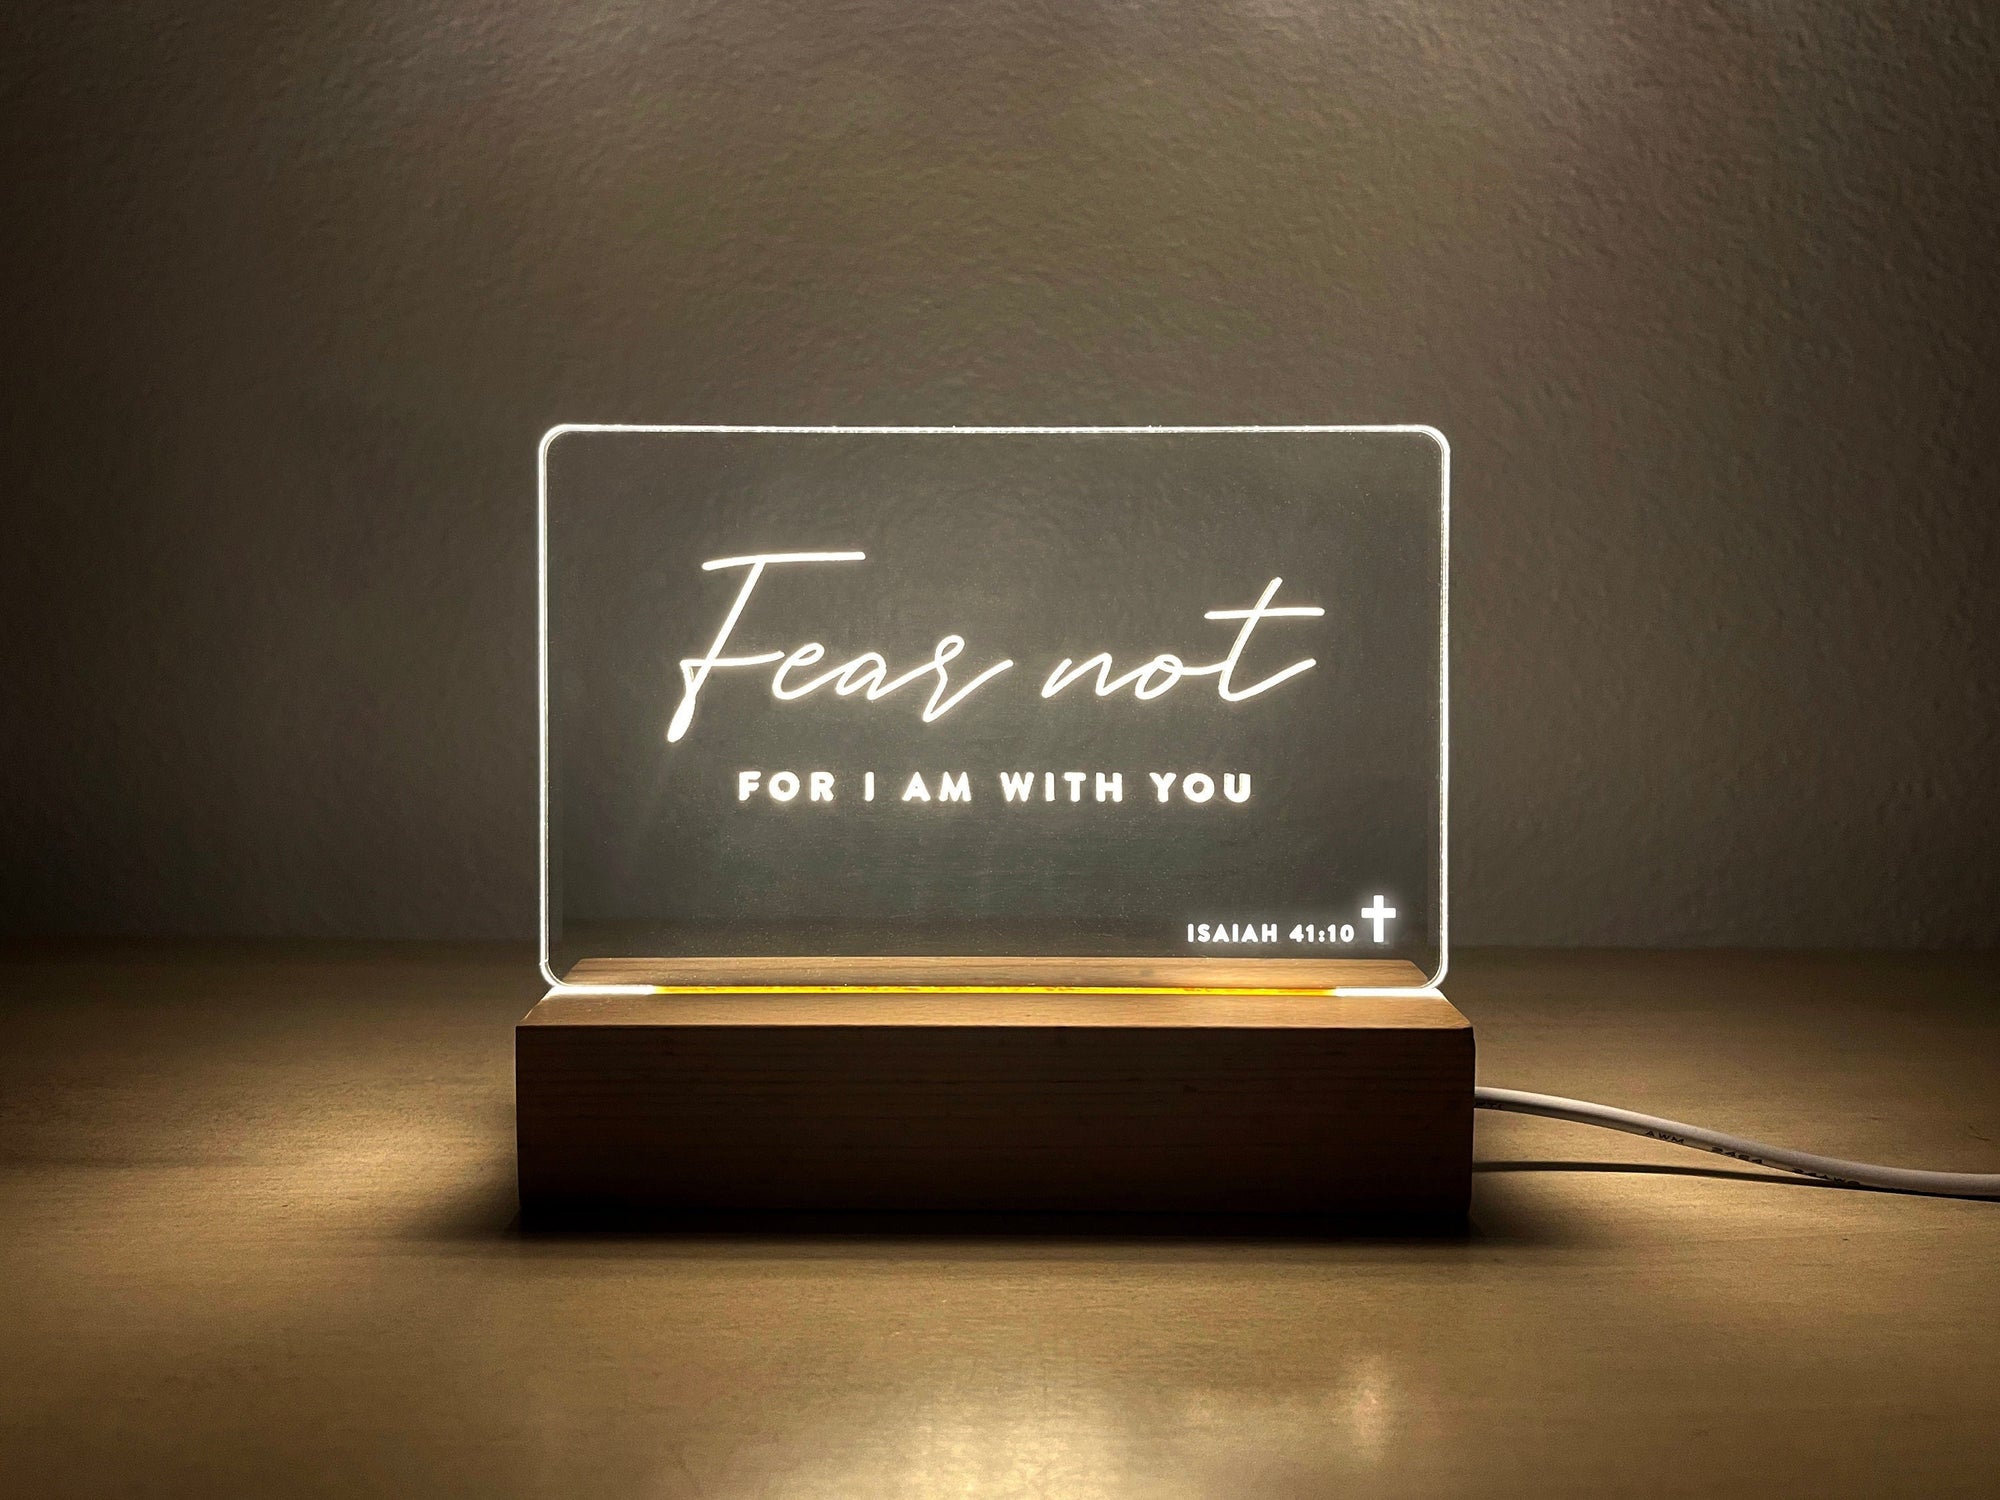 Fear Not For I Am With You Night Light - Bible Verse Led Light - New Home Gift - Gift For Christian